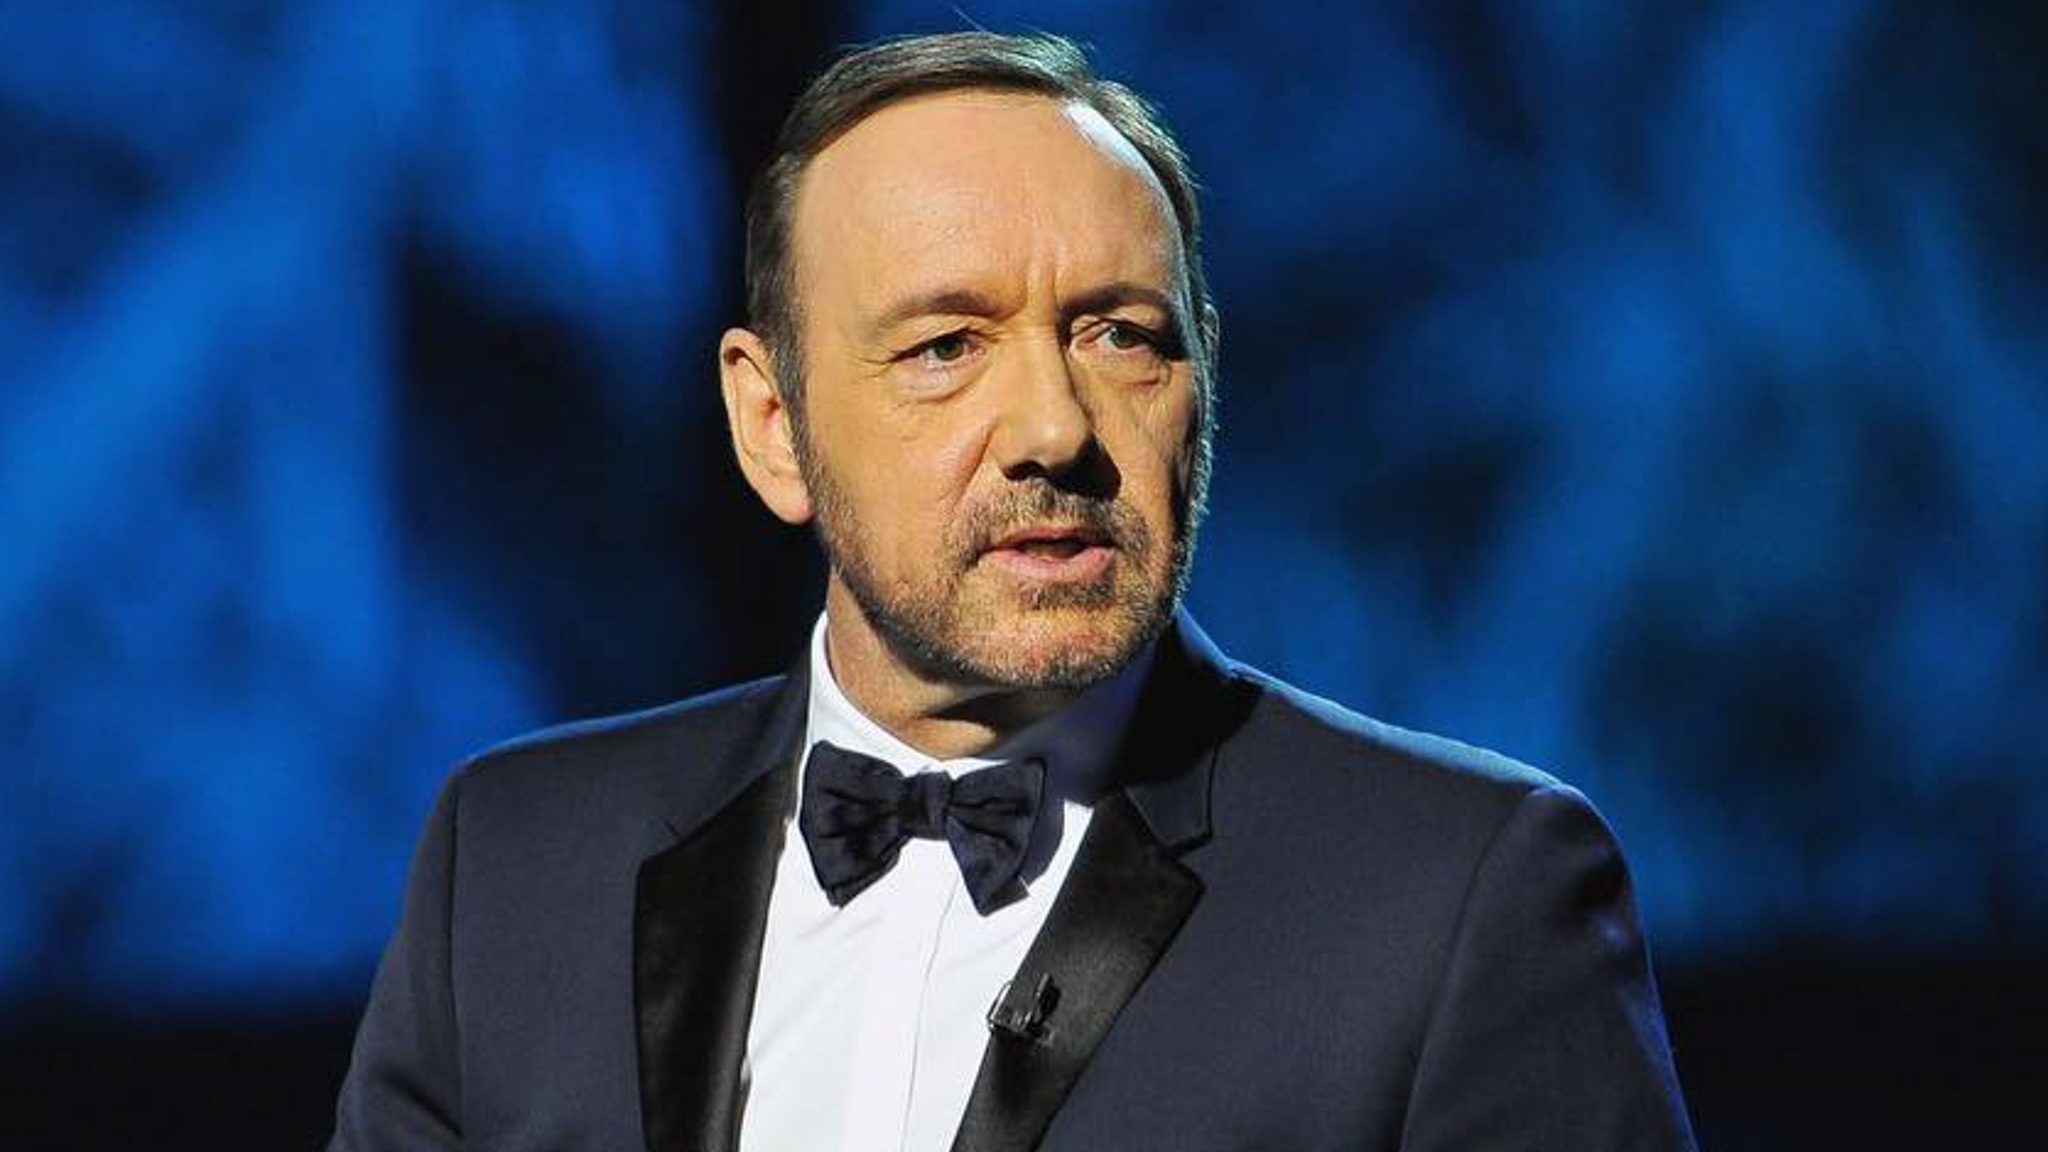 New sex charge filed against Kevin Spacey